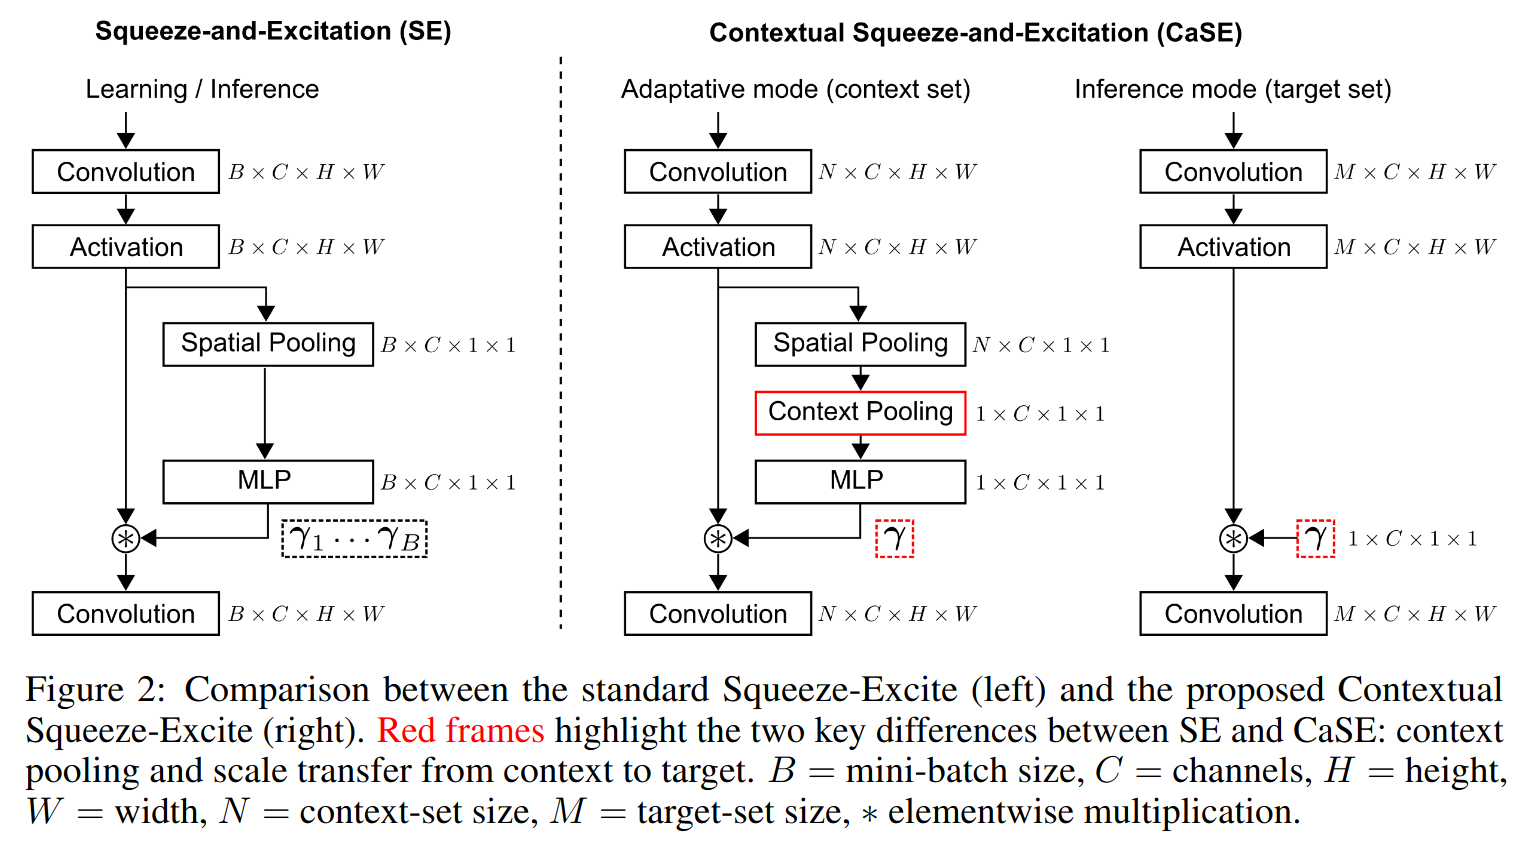 Squeeze-and-Excitation (SE) vs Contextual Squeeze-and-Excitation (CaSE)